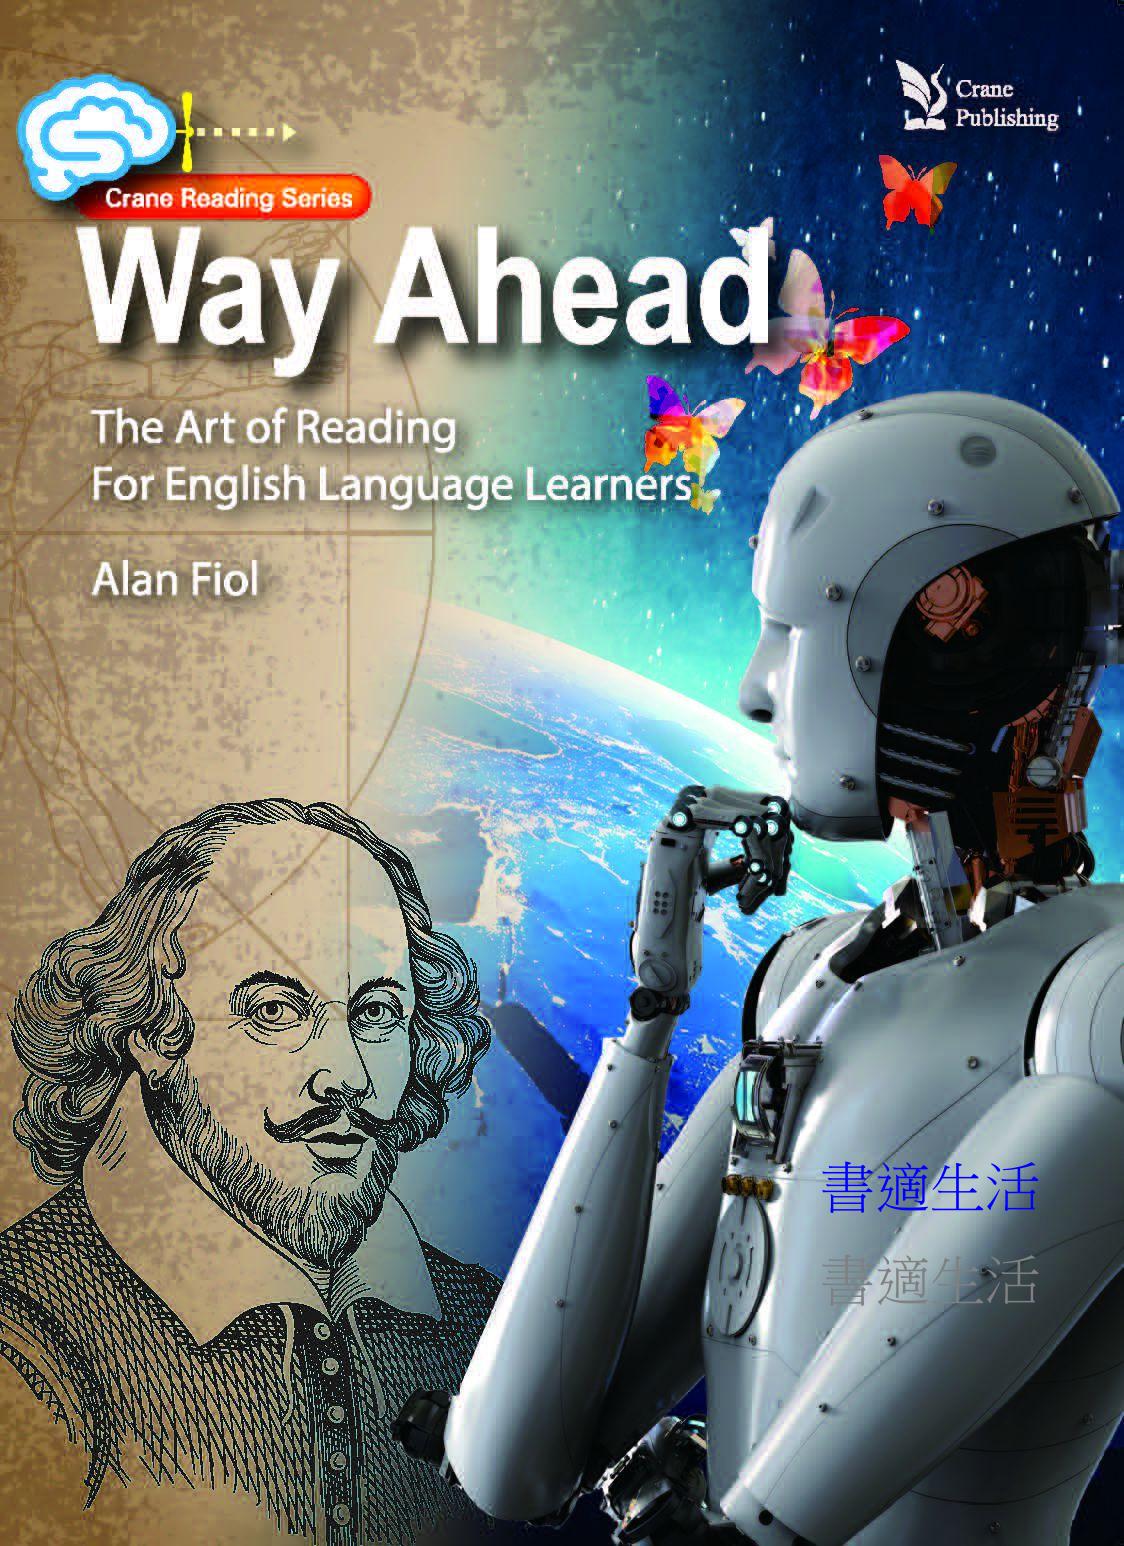 Way Ahead: The Art of Reading for English Language Learners